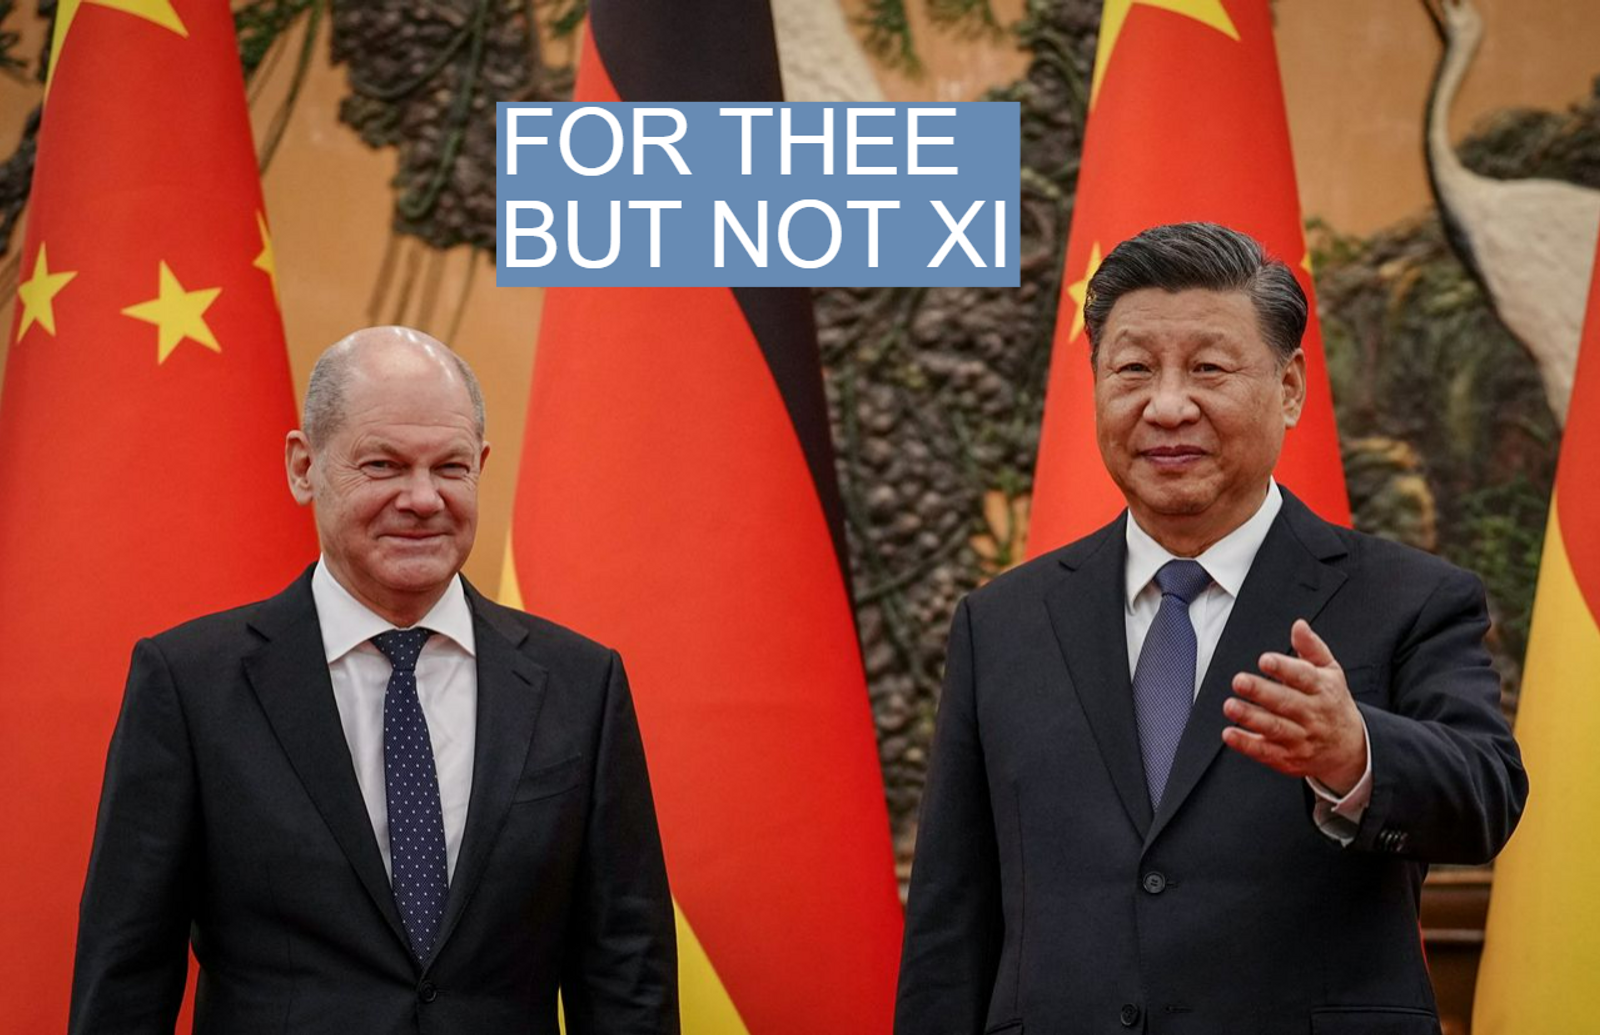 President Xi Jinping and Chancellor Olaf Scholz